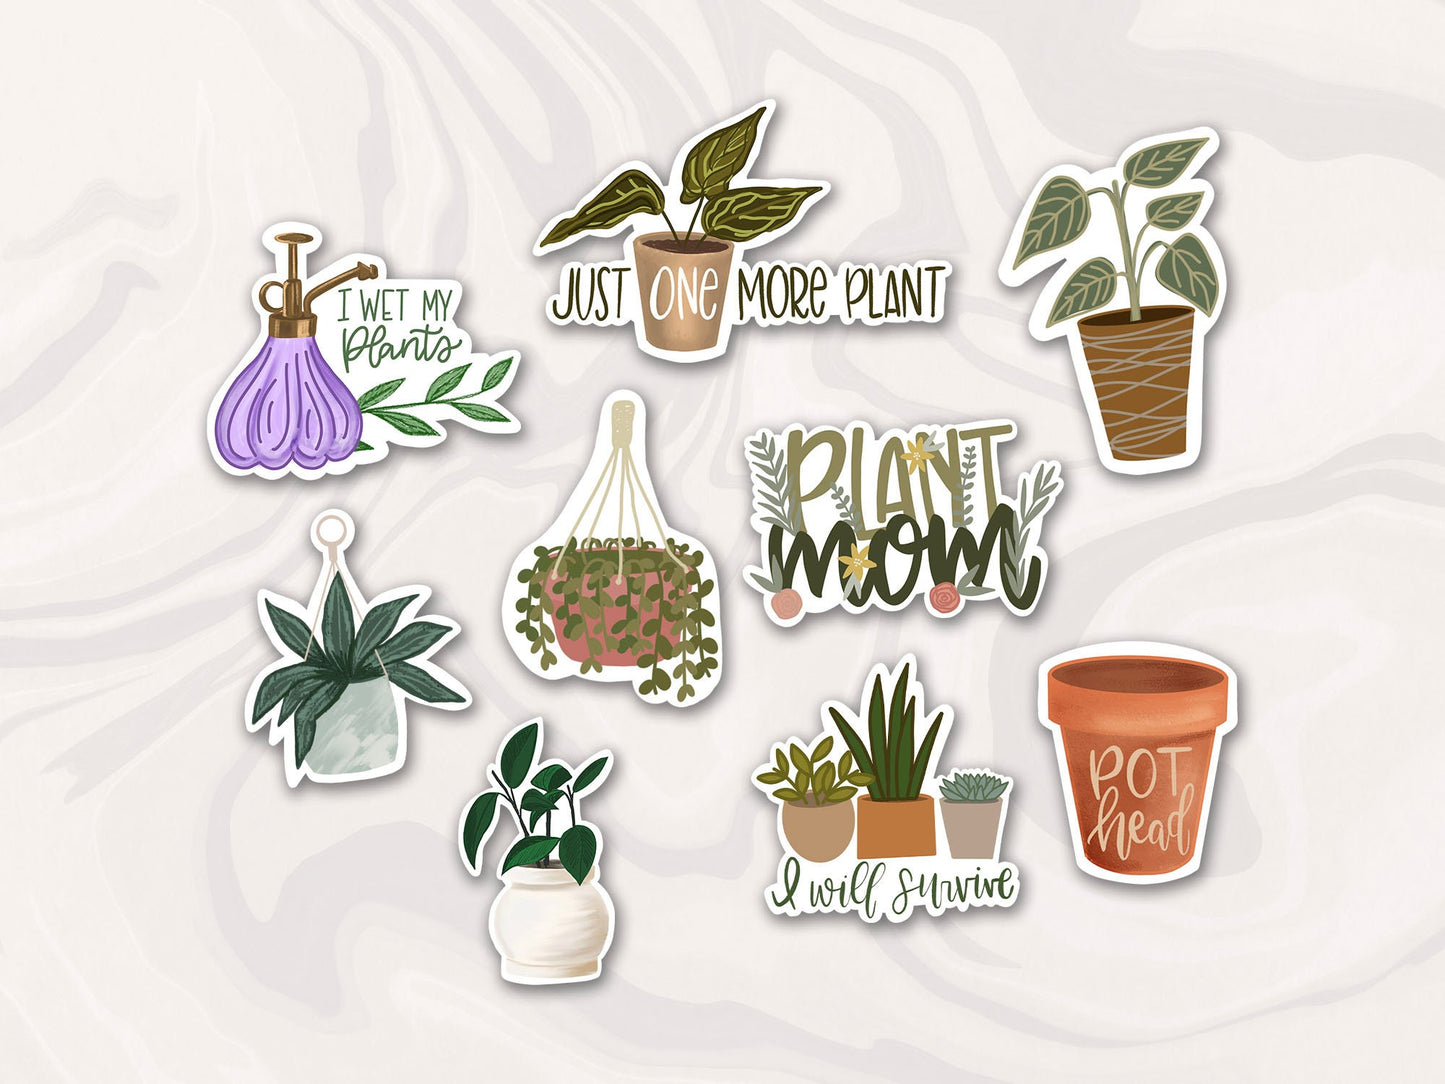 Plant Lover Sticker Bundle, Plant stickers, botanical sticker, flower decals, plant lady gift, Set of 9 stickers, Gift